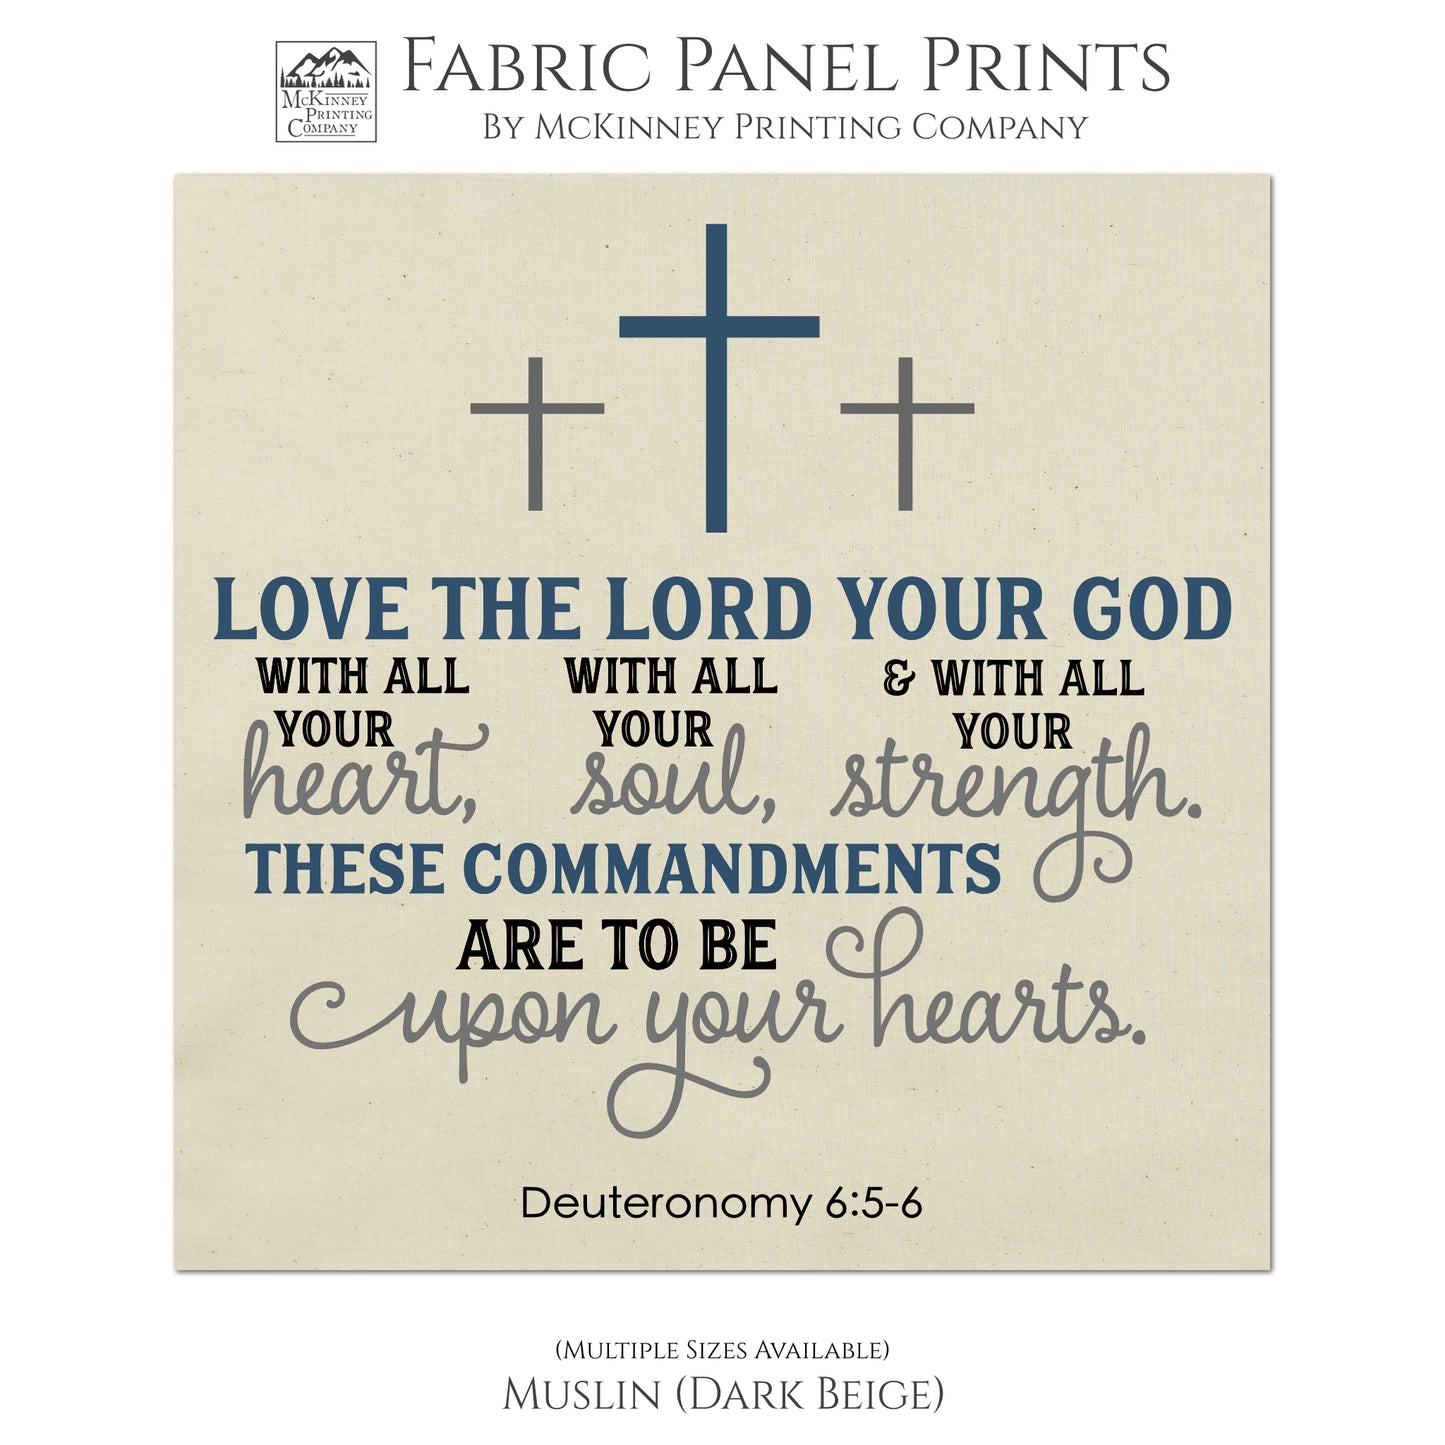 Deuteronomy 6:5 - 6, Love the Lord Your God, Scripture Fabric, Wall Art, Decor, Sewing, Materials, Craft - Muslin